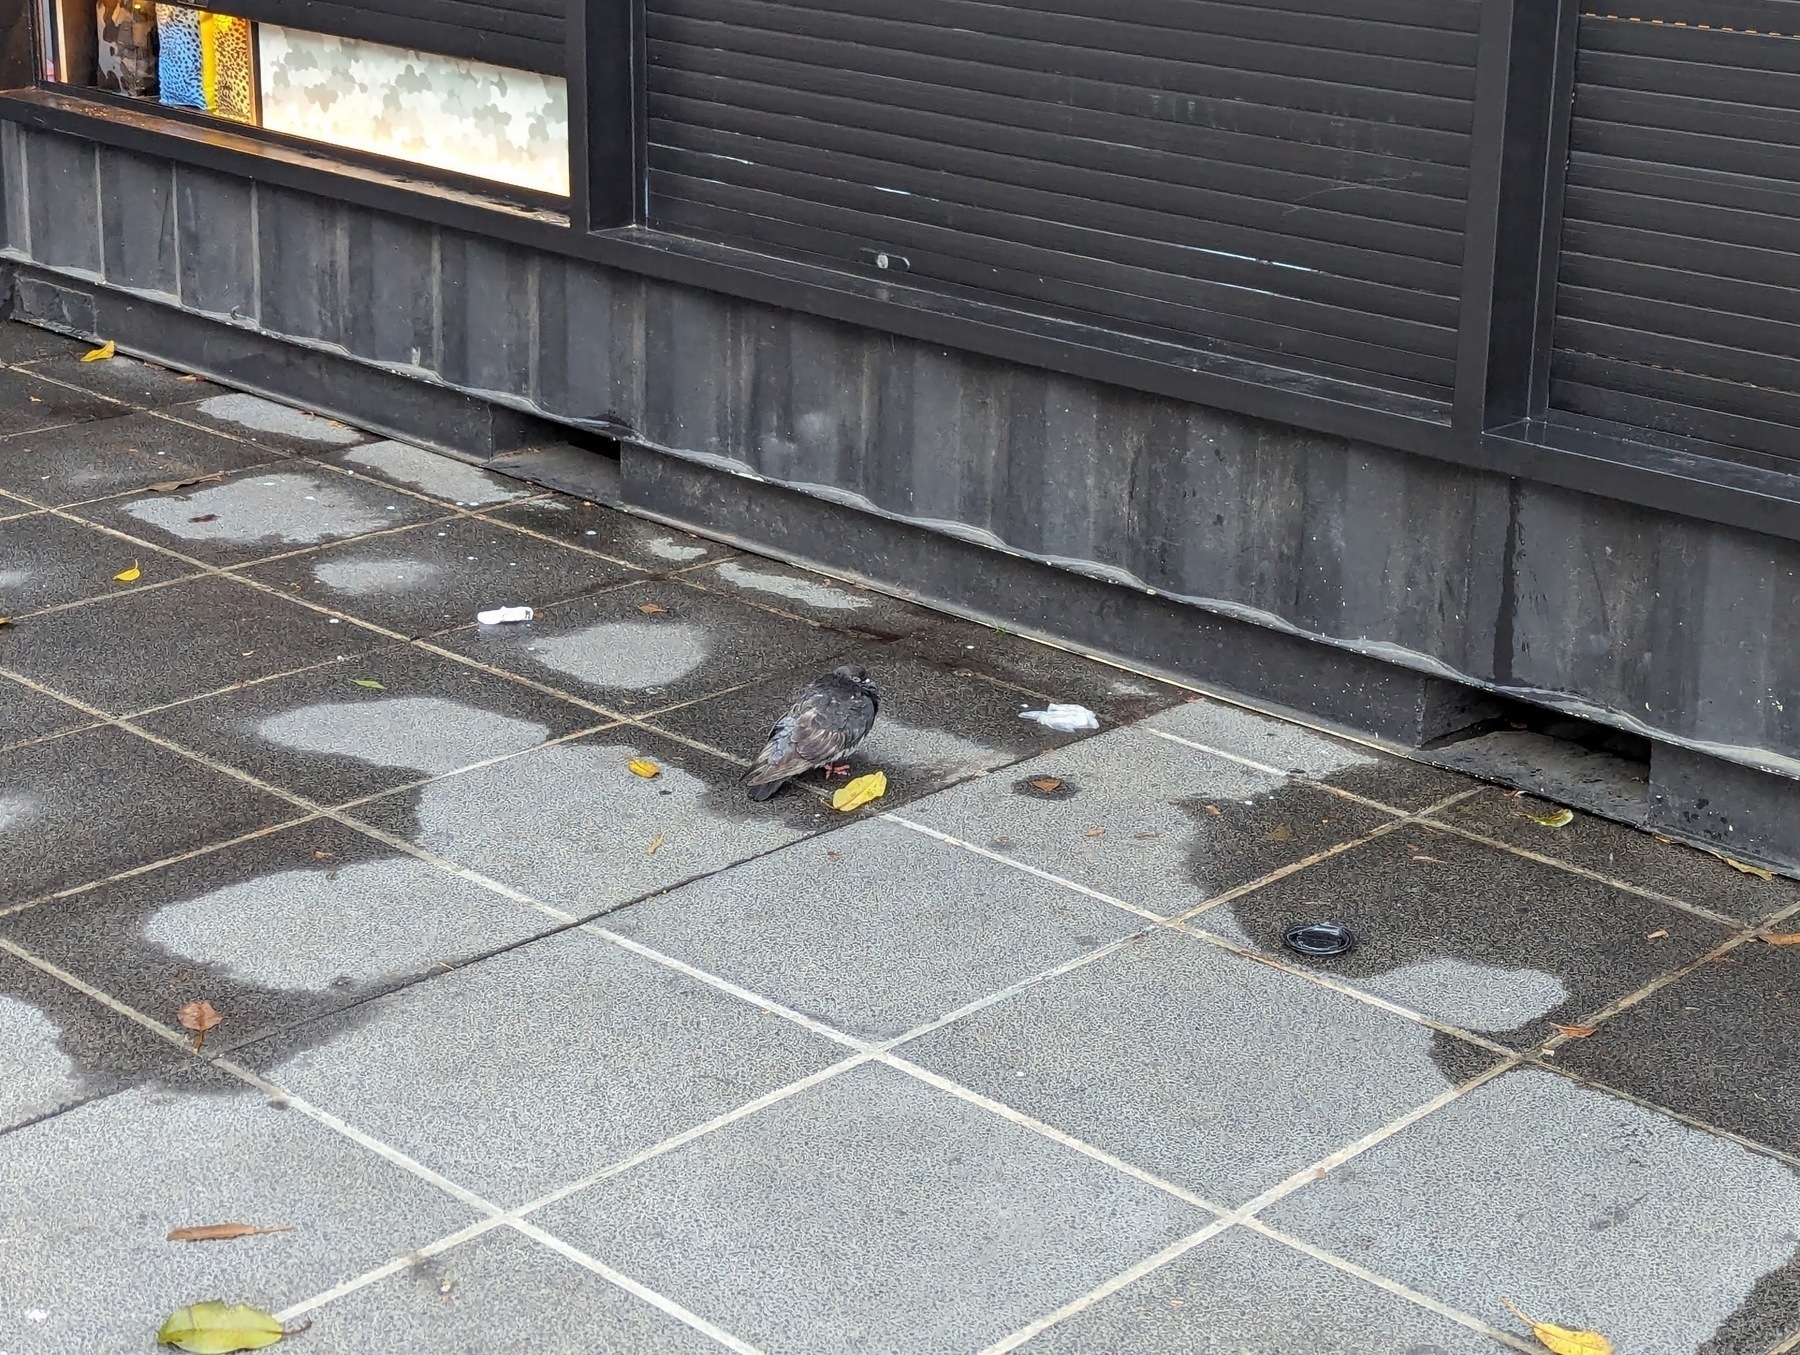 A pigeon in front of closed shutters over a shop